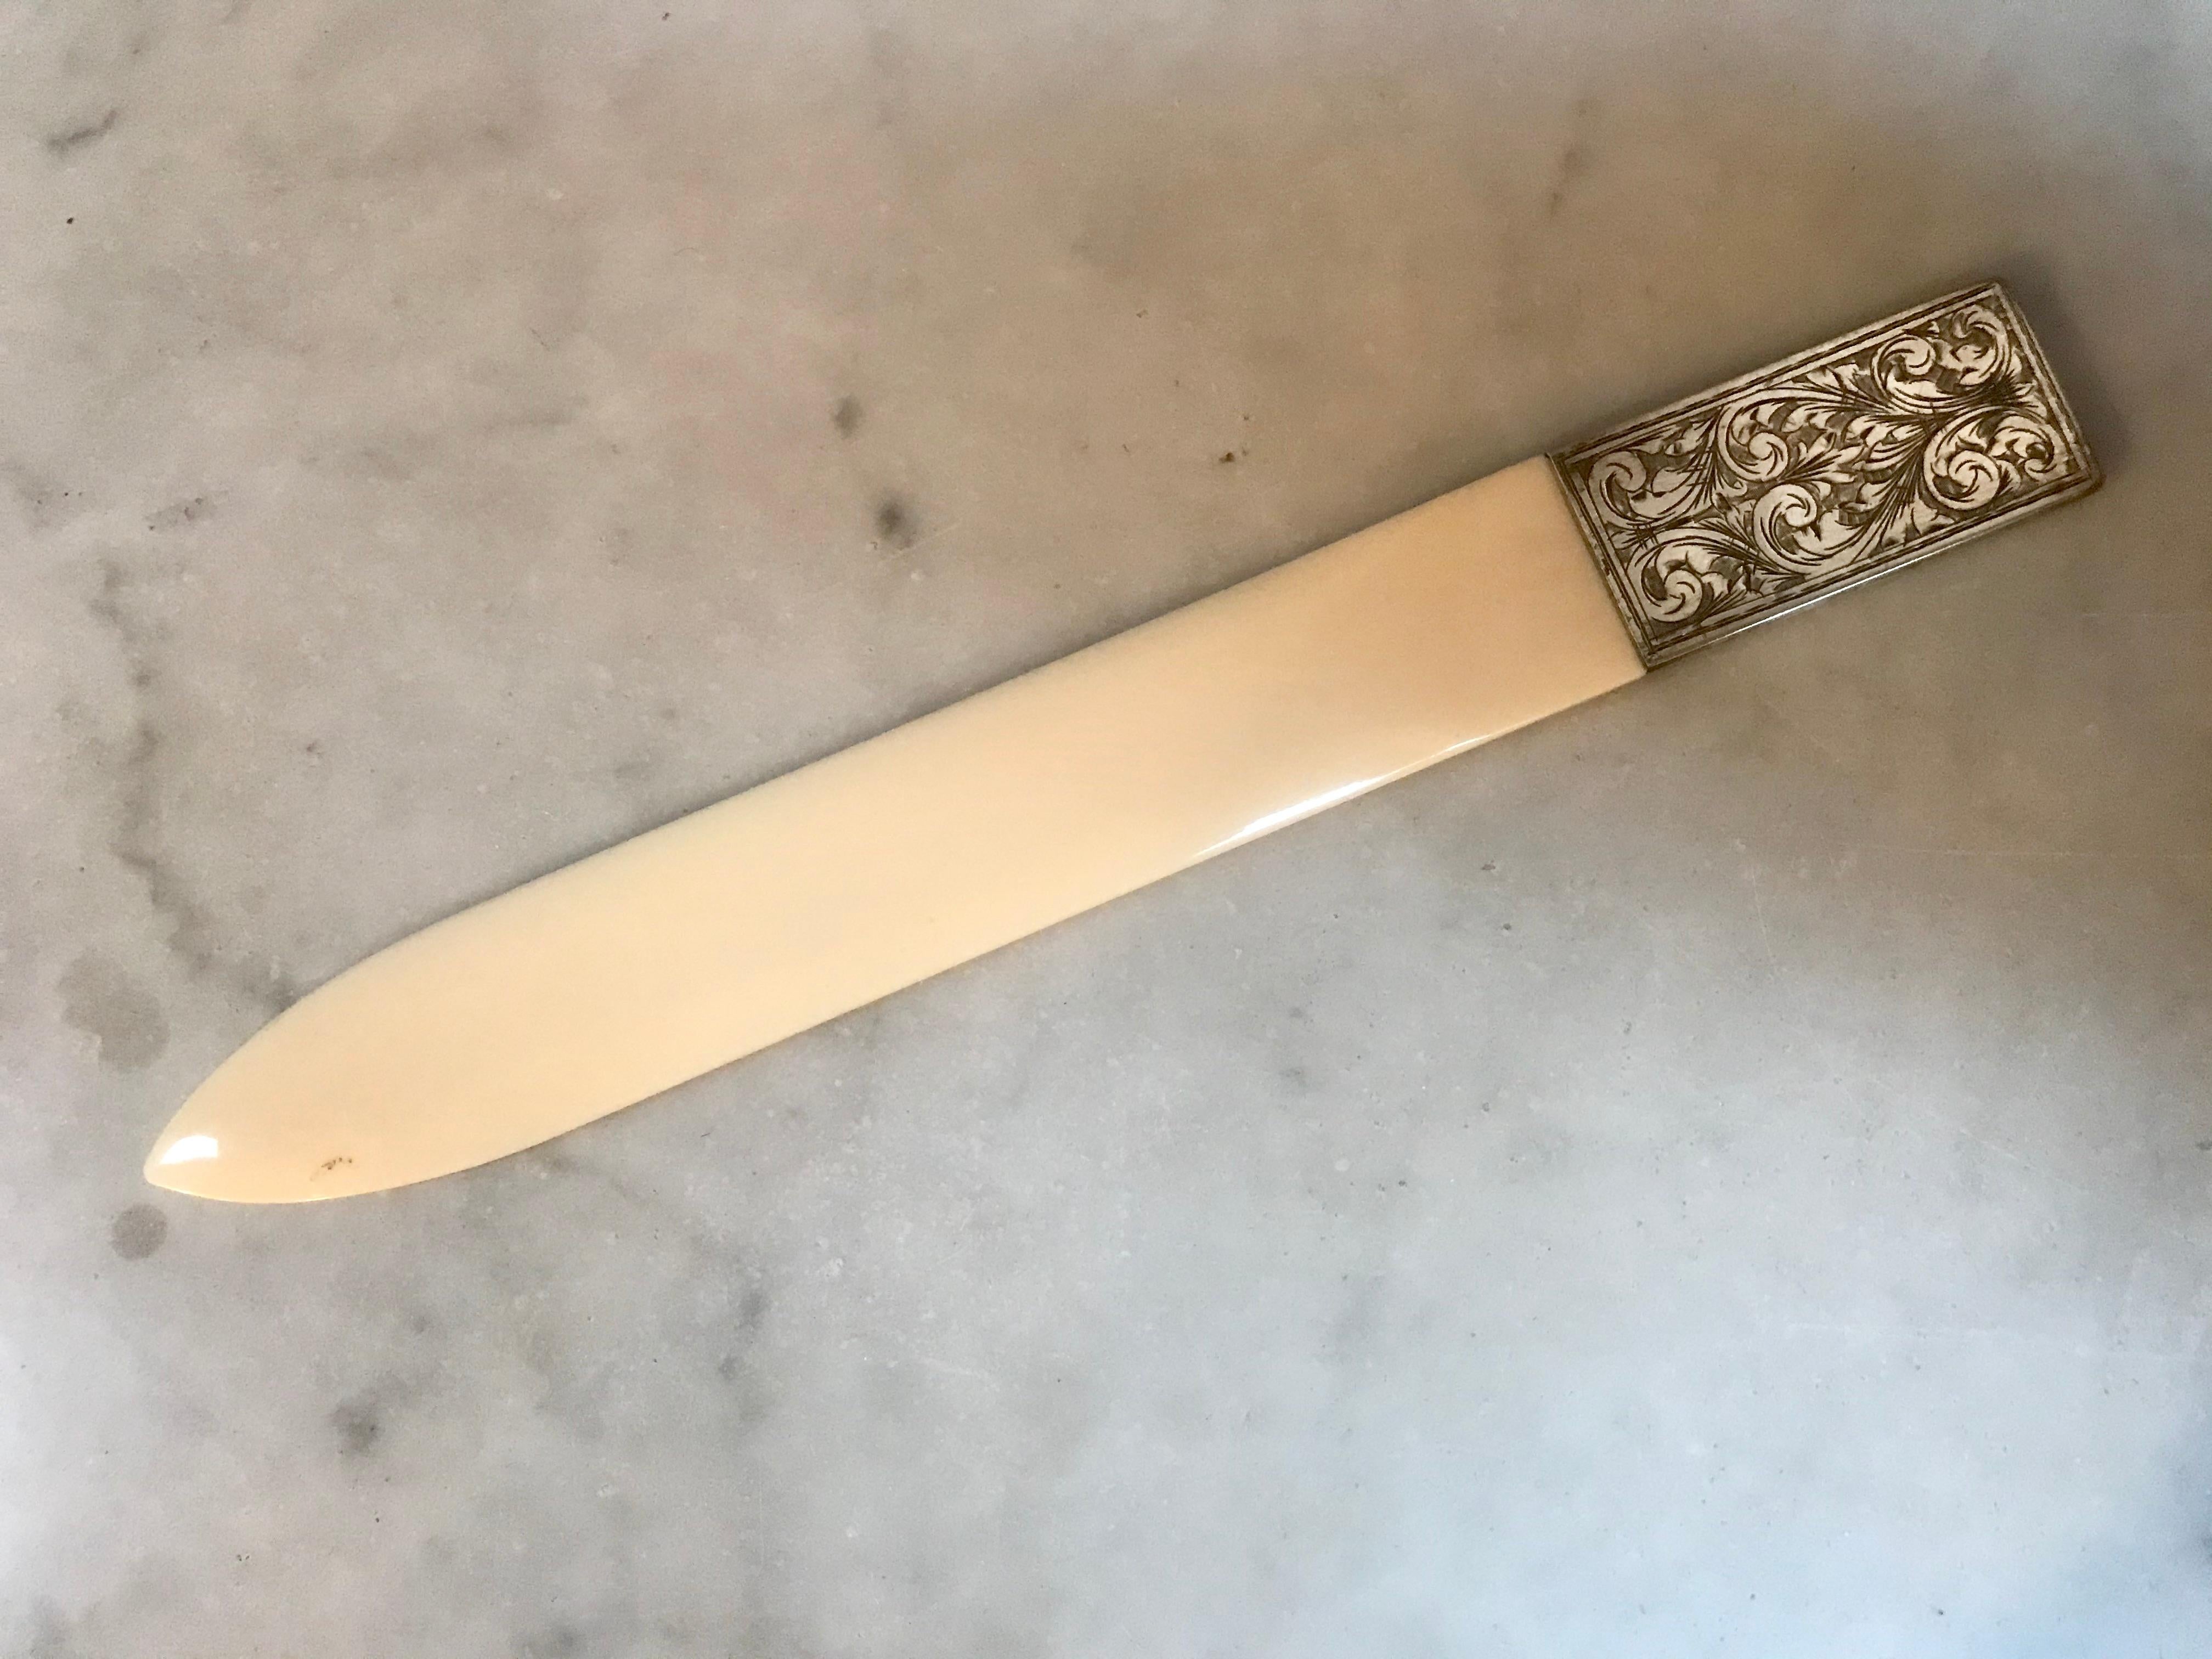 Bone and silver letter opener. Vintage bone and sterling silver letter opener in a simple, 1930s.